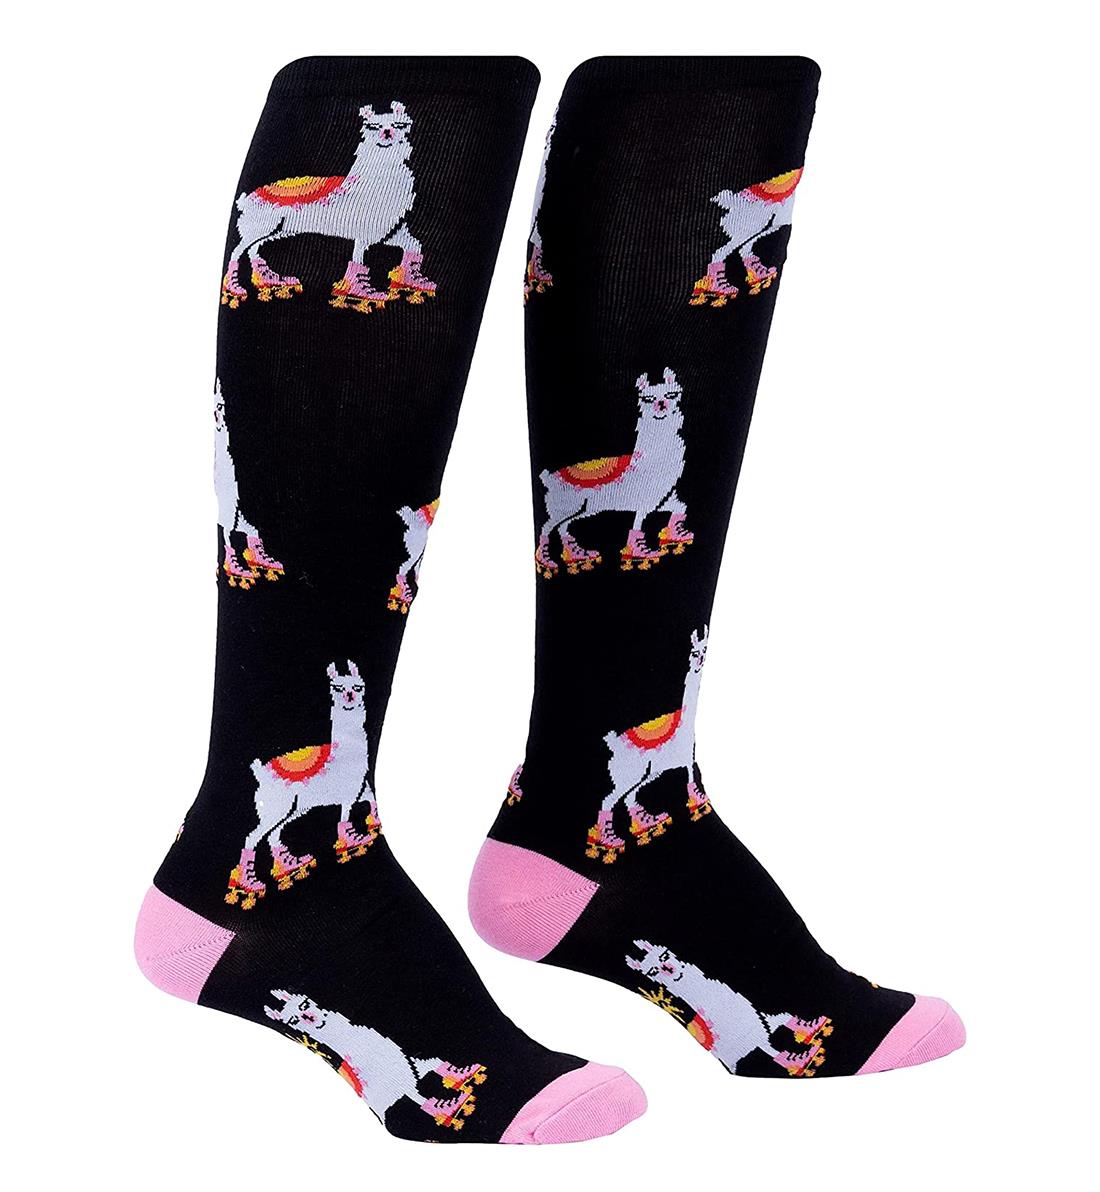 SOCK it to me Unisex Knee High Socks (F0614),They See Me Rollin' - They See Me Rollin',One Size